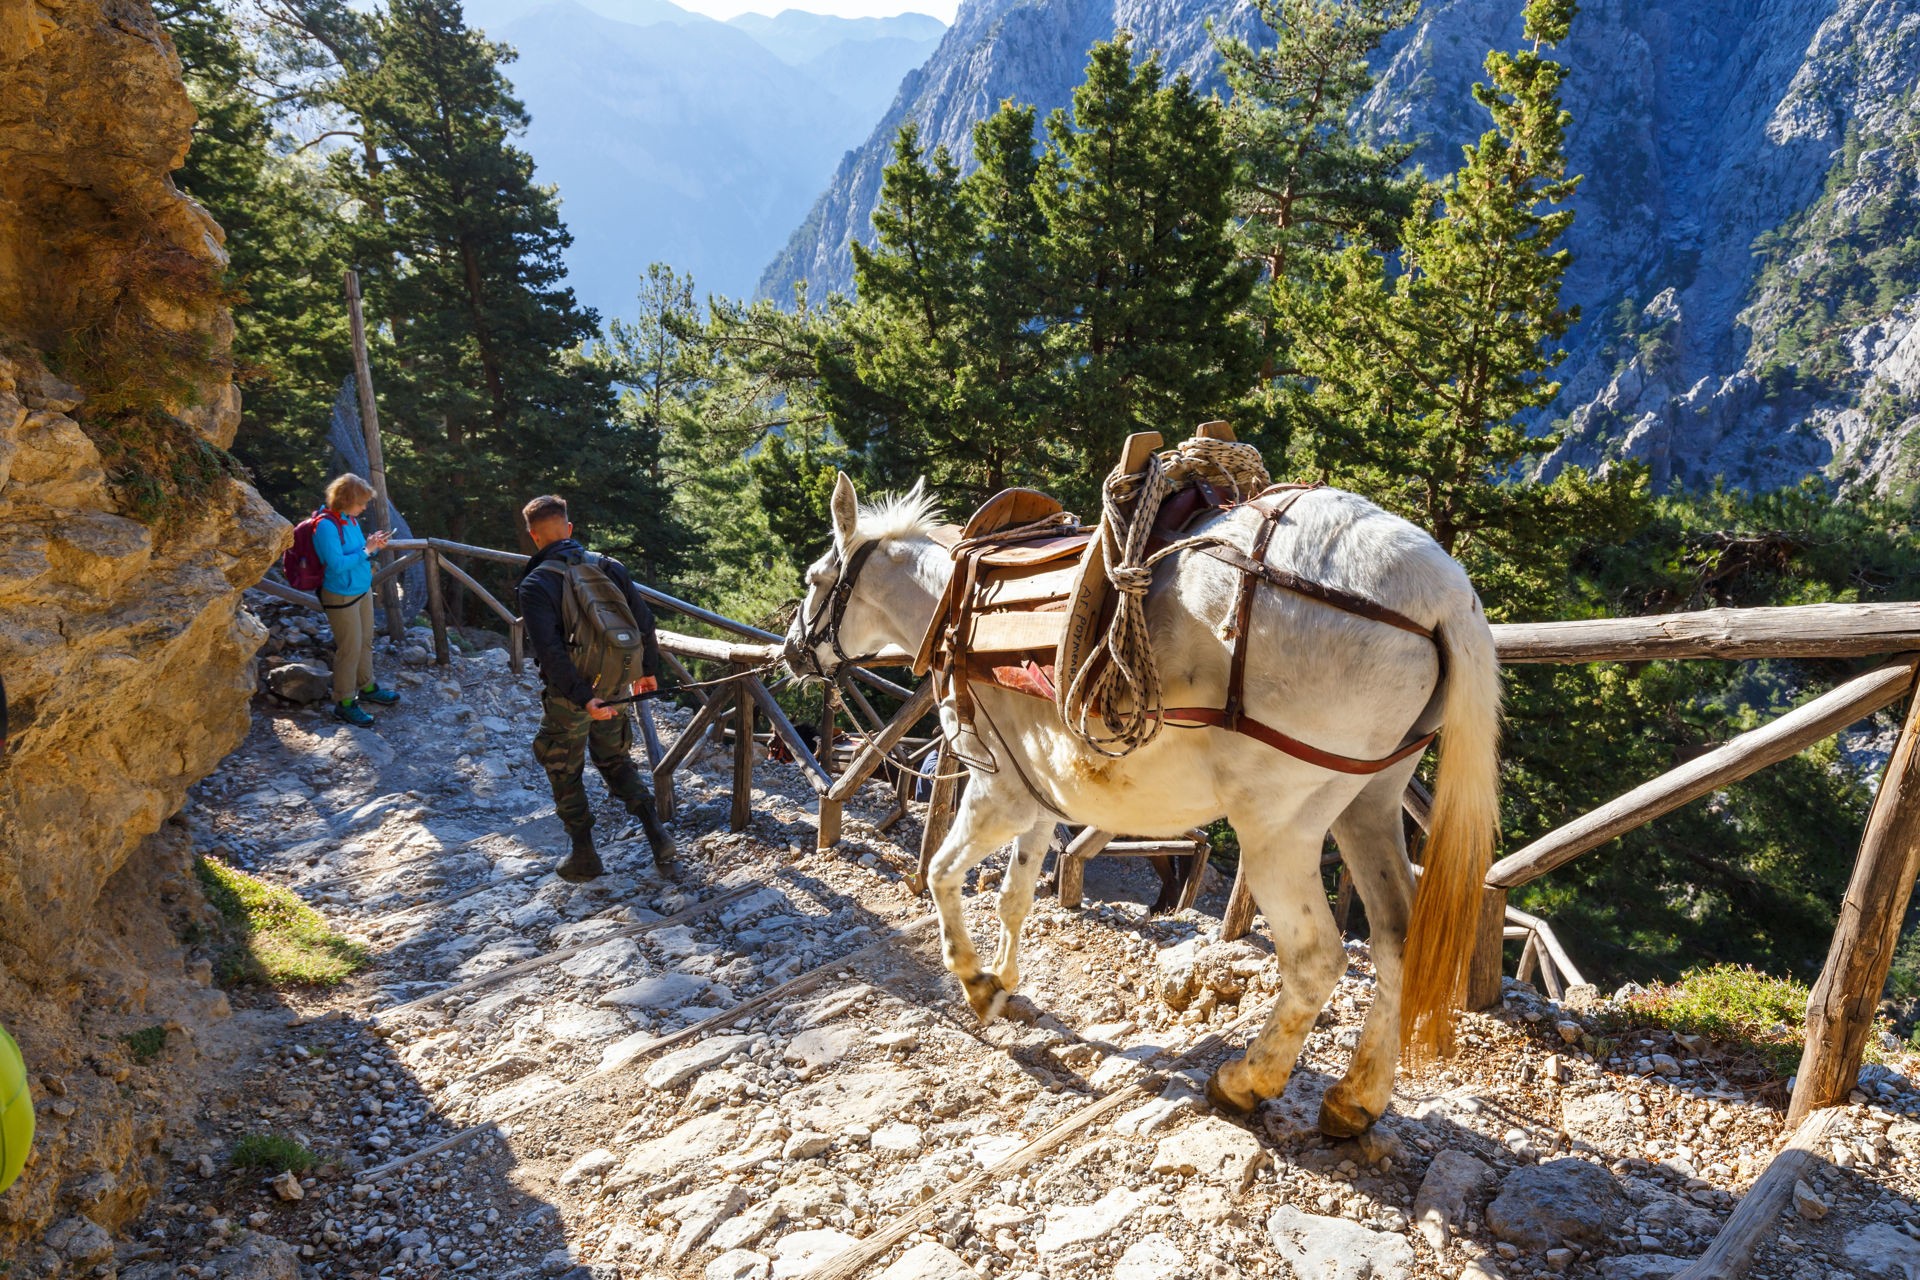 Samaria Gorge Full Day Tour from Chania